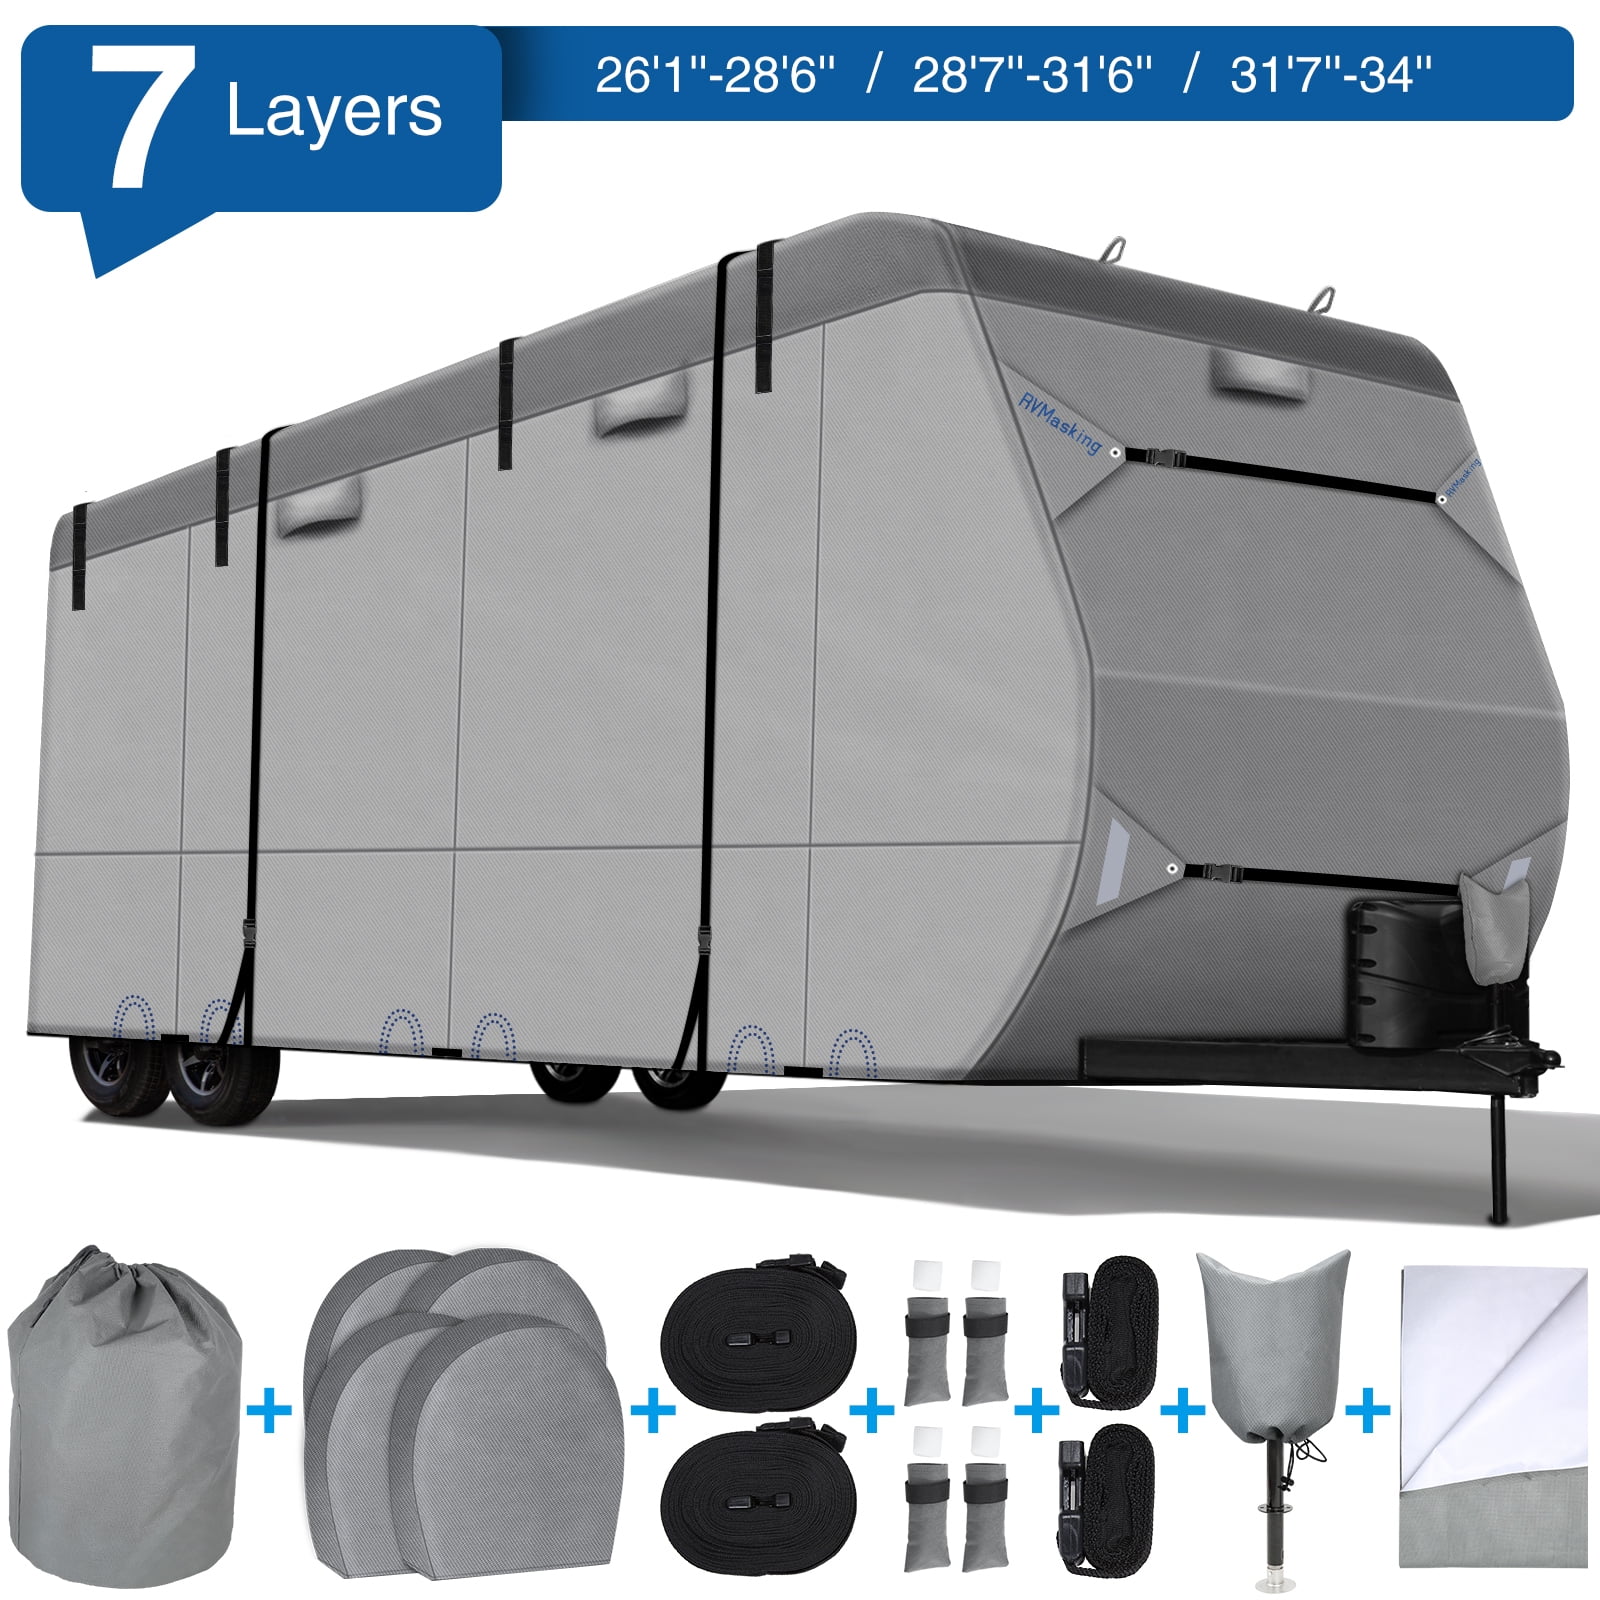 Fonzier 5 Layers Top Travel Trailer RV Cover Heavy Duty Camper Cover for 28’7”-31’6” Motorhome Anti-UV 2Pcs Straps & Gutter Covers Breathable with Tongue Jack Cover Rip-Stop 